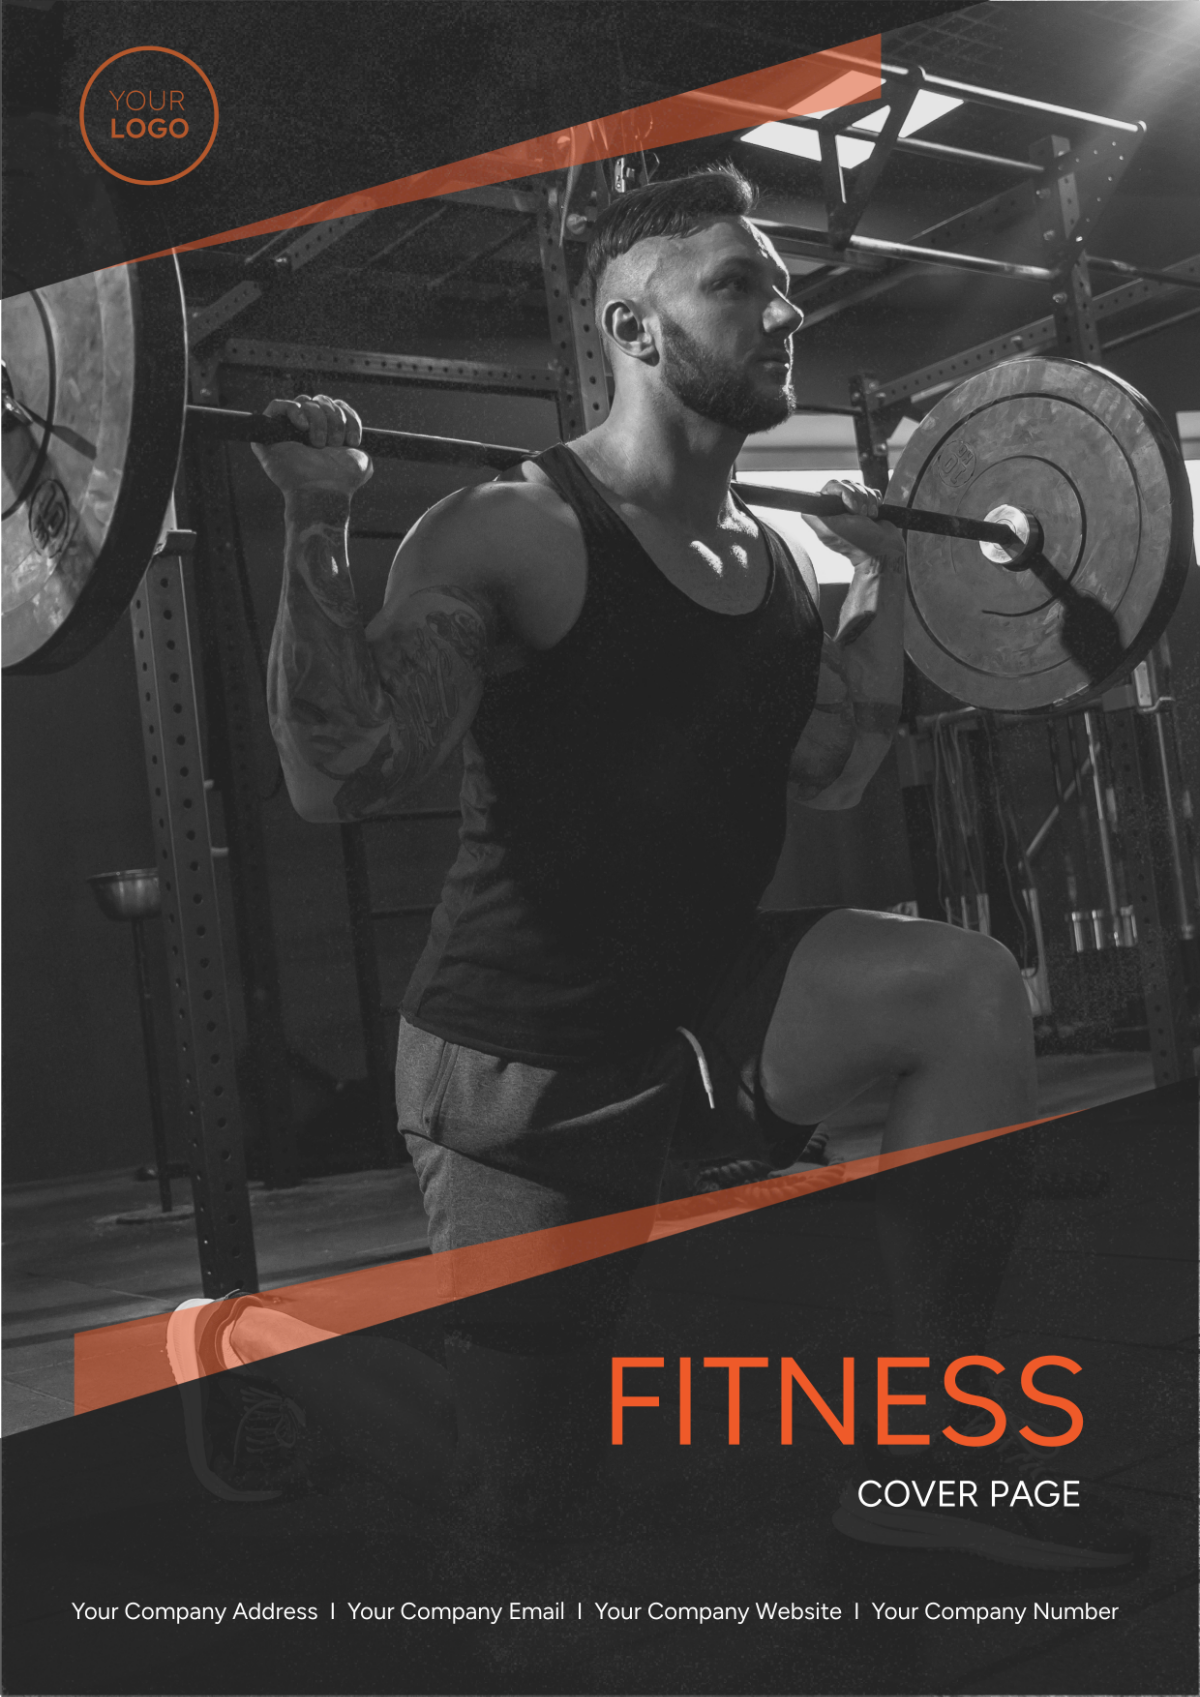 Fitness Center Business Cover Page